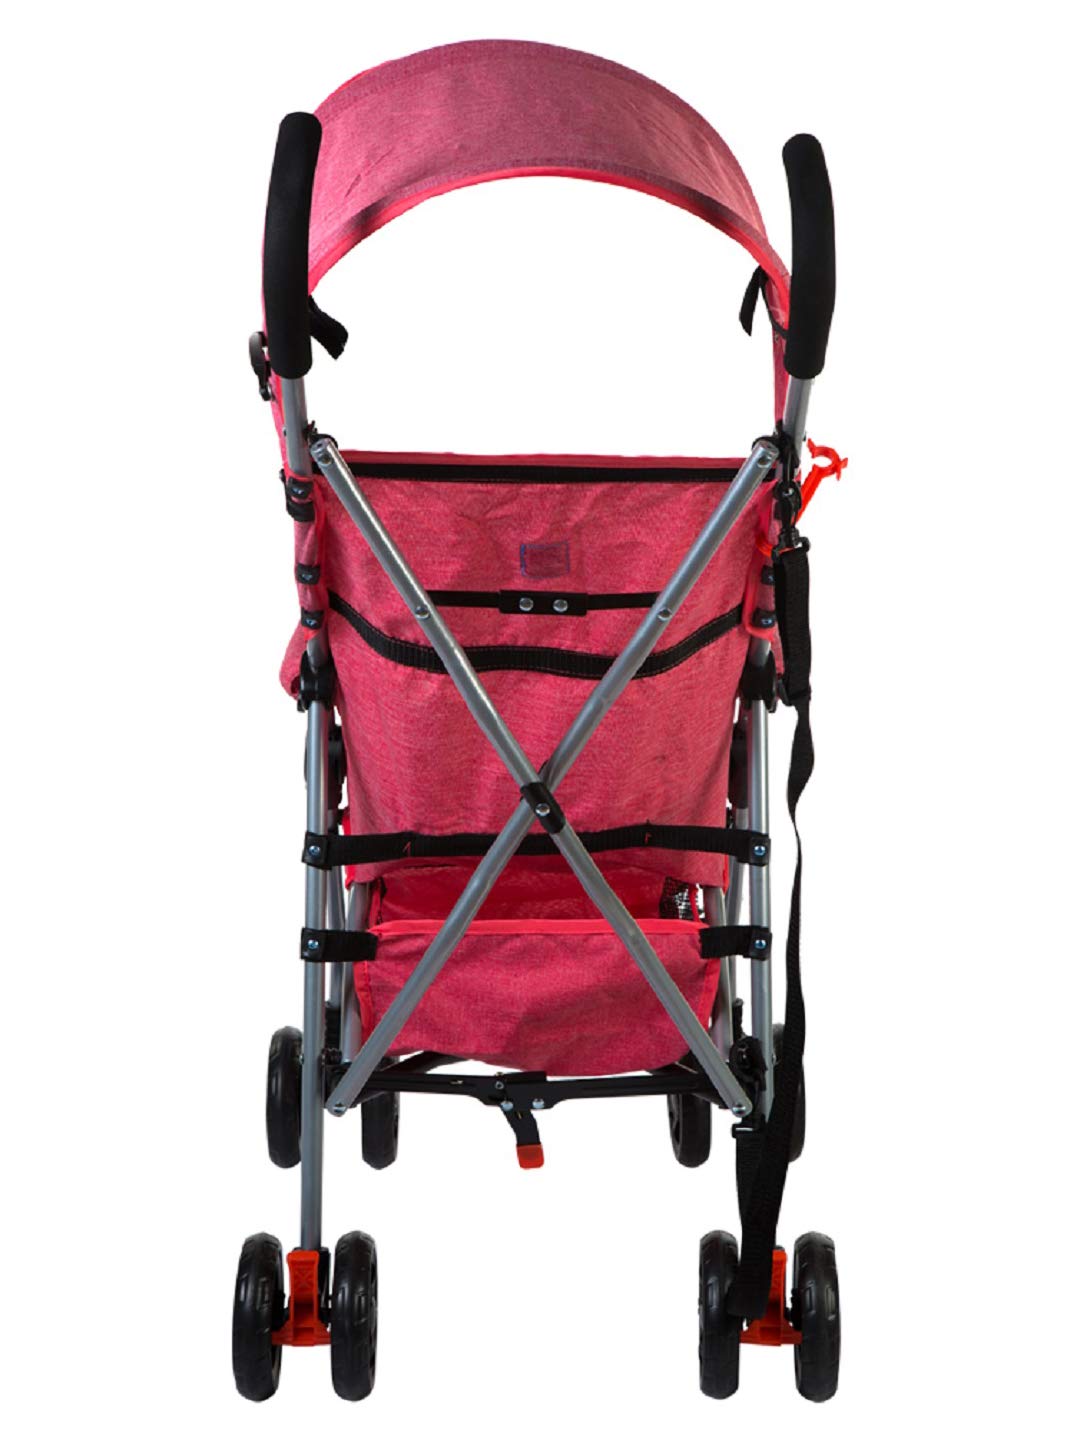 Mee Mee Stylish Light Weight Baby Stroller with Umbrella Folding